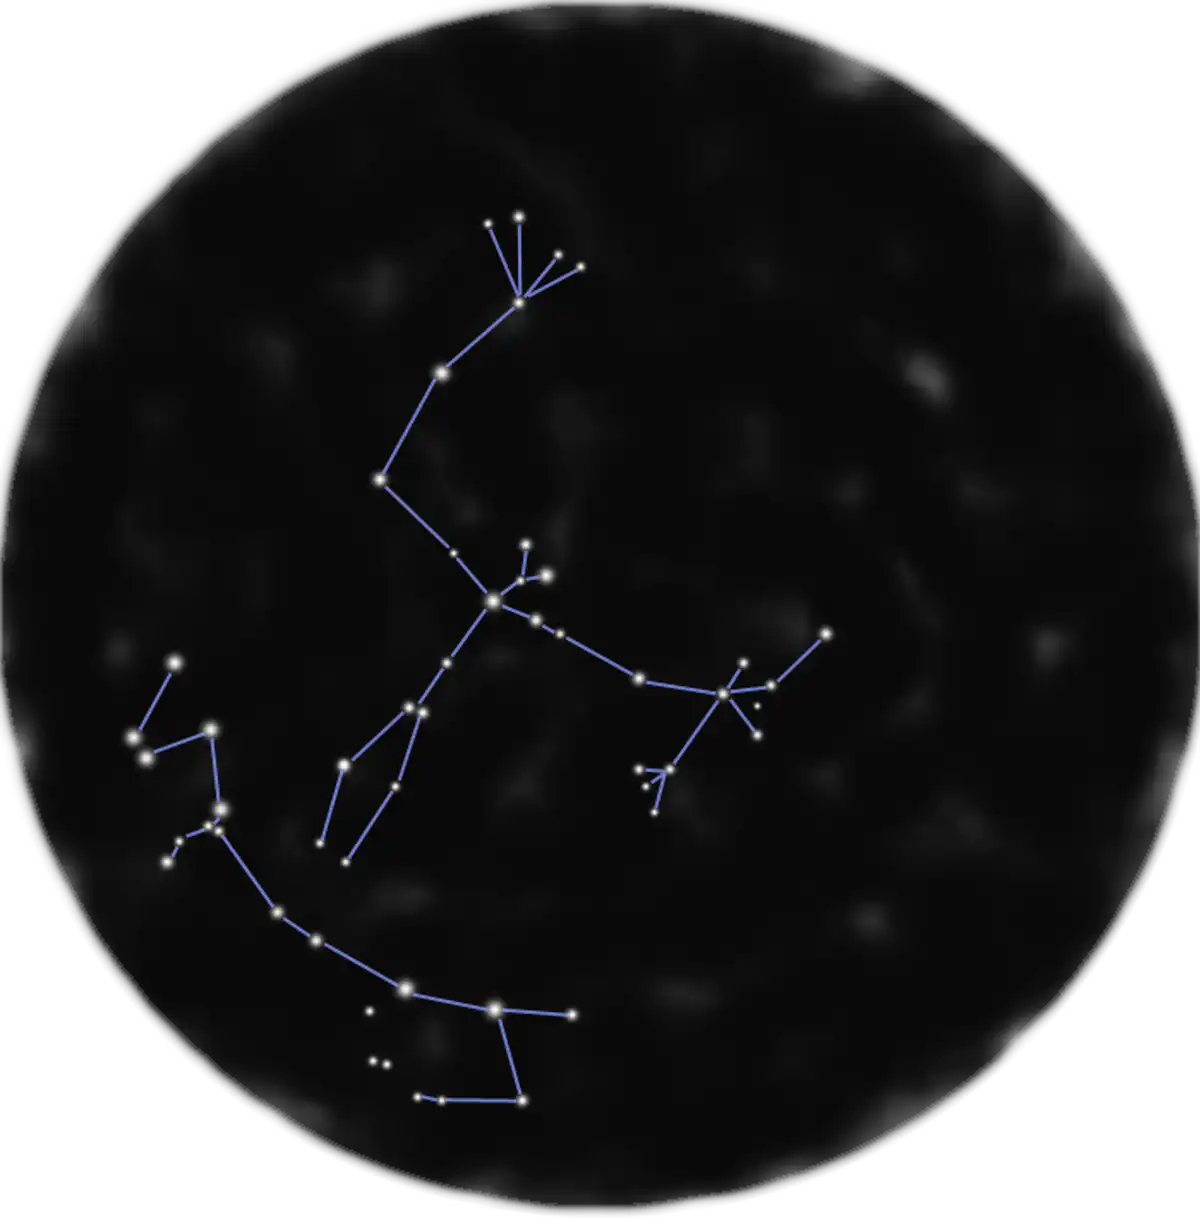 The constellation Tagai. The curve of stars towards the bottom left are the stars of Scorpius. [Wikimedia/Osiris](https://commons.wikimedia.org/wiki/File:Tagai.png), [CC BY-SA](https://creativecommons.org/licenses/by-sa/4.0/)